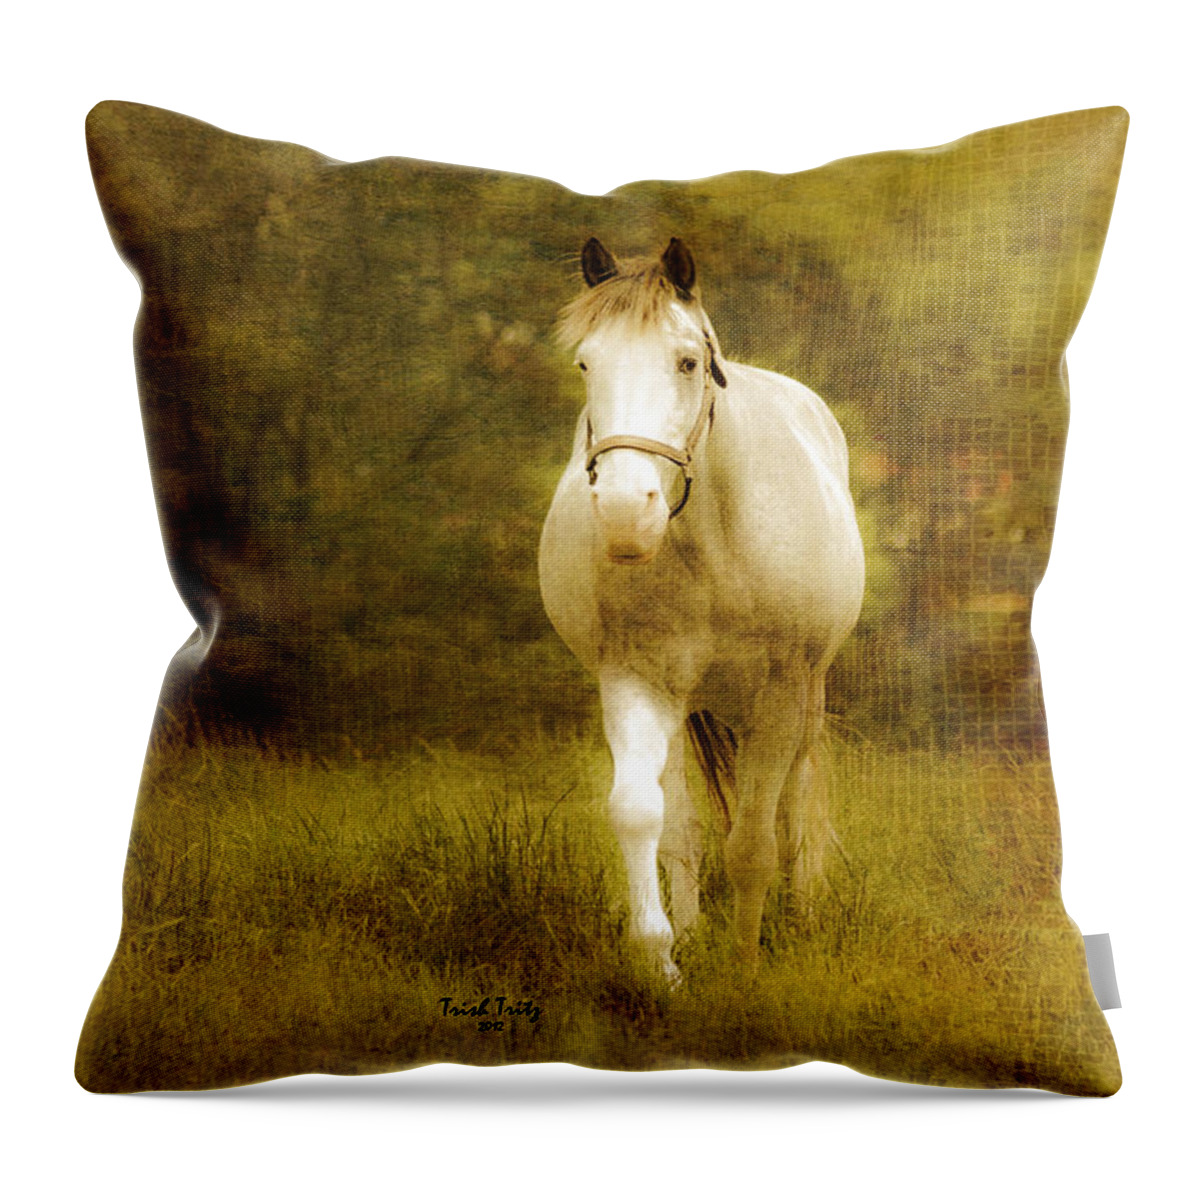 Horse Throw Pillow featuring the photograph Andre On The Farm by Trish Tritz